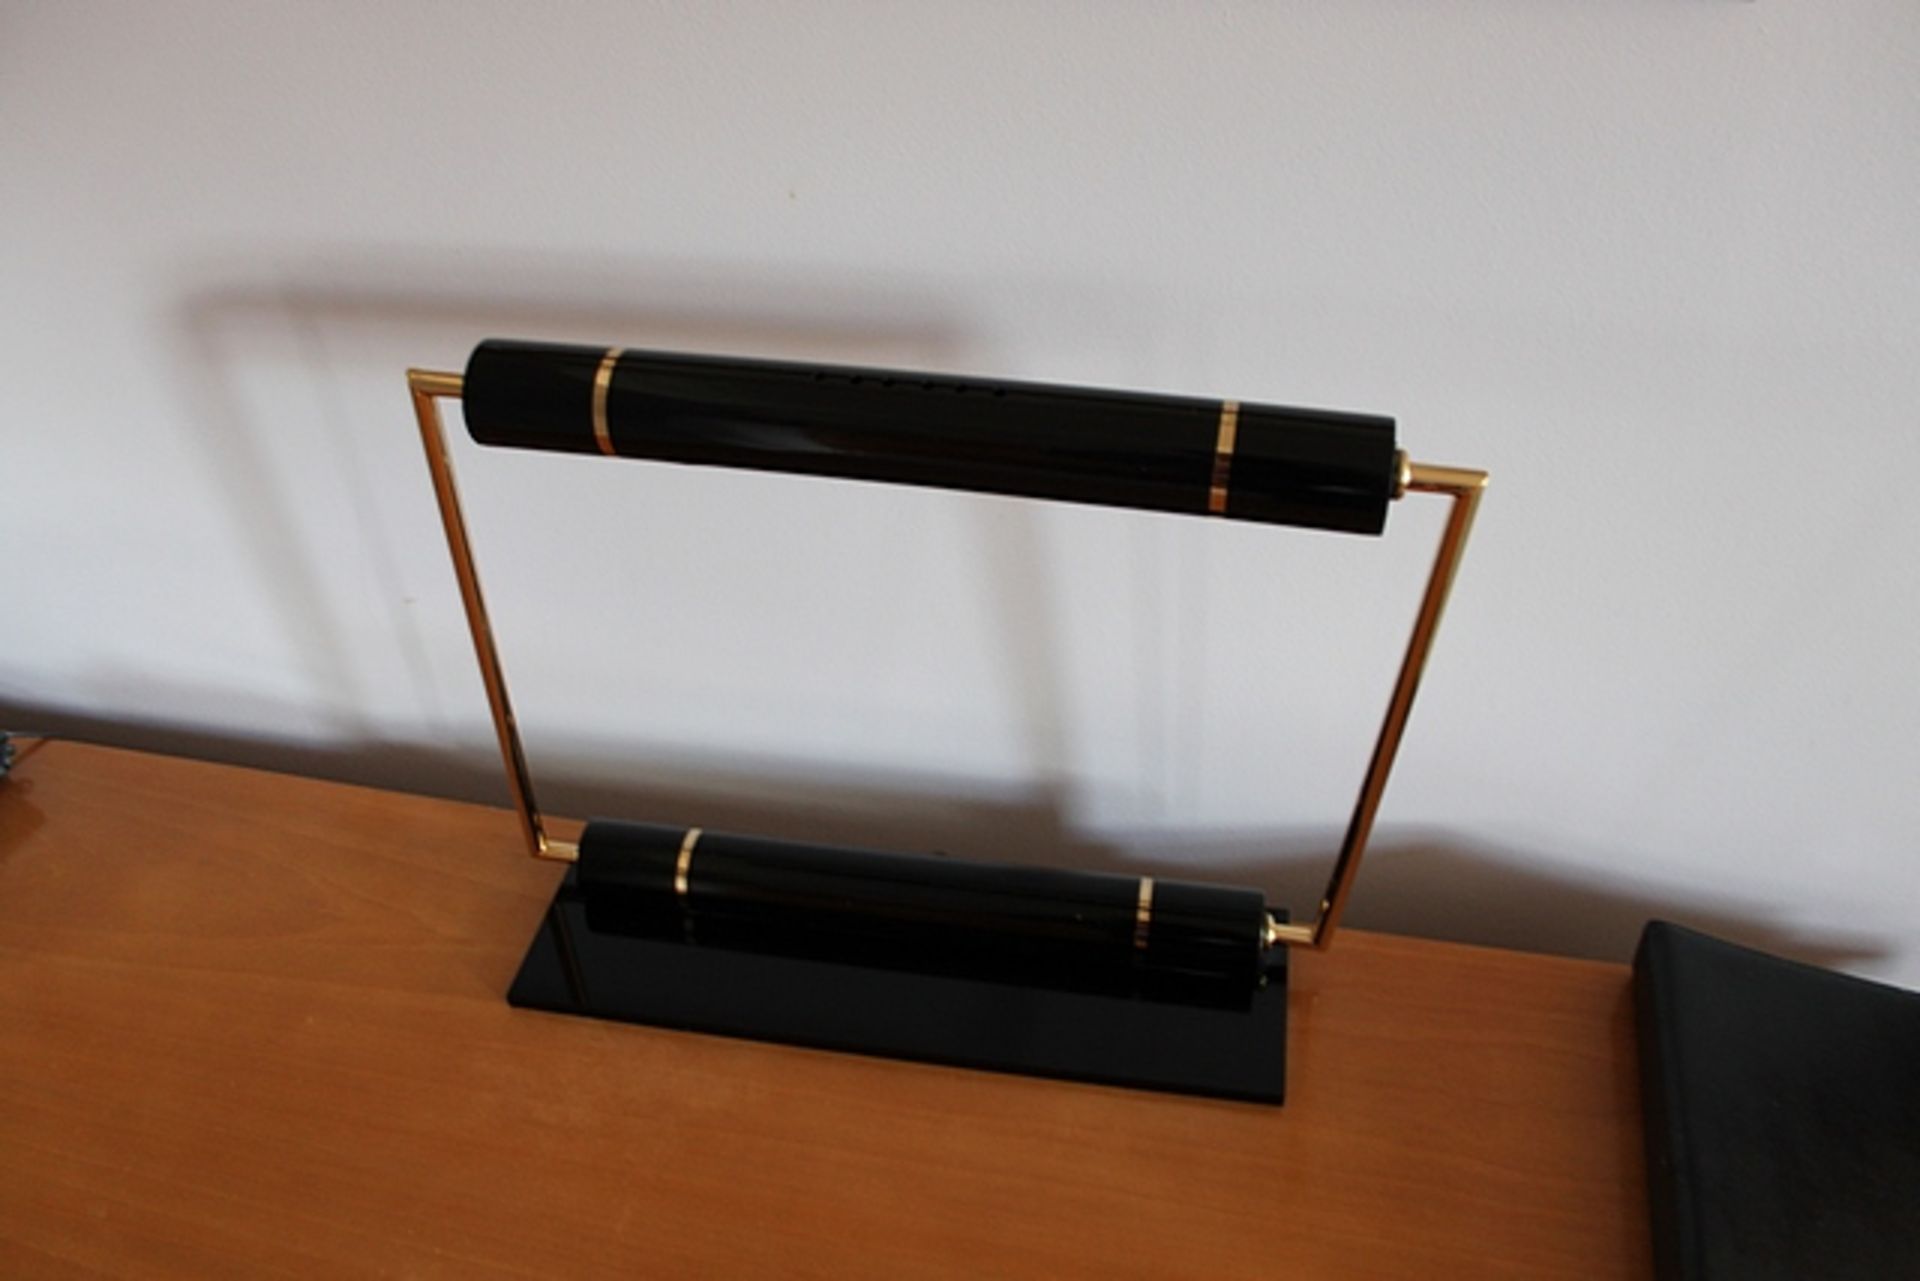 A contemporary square bankers style lamp resin and brass finish 490mm